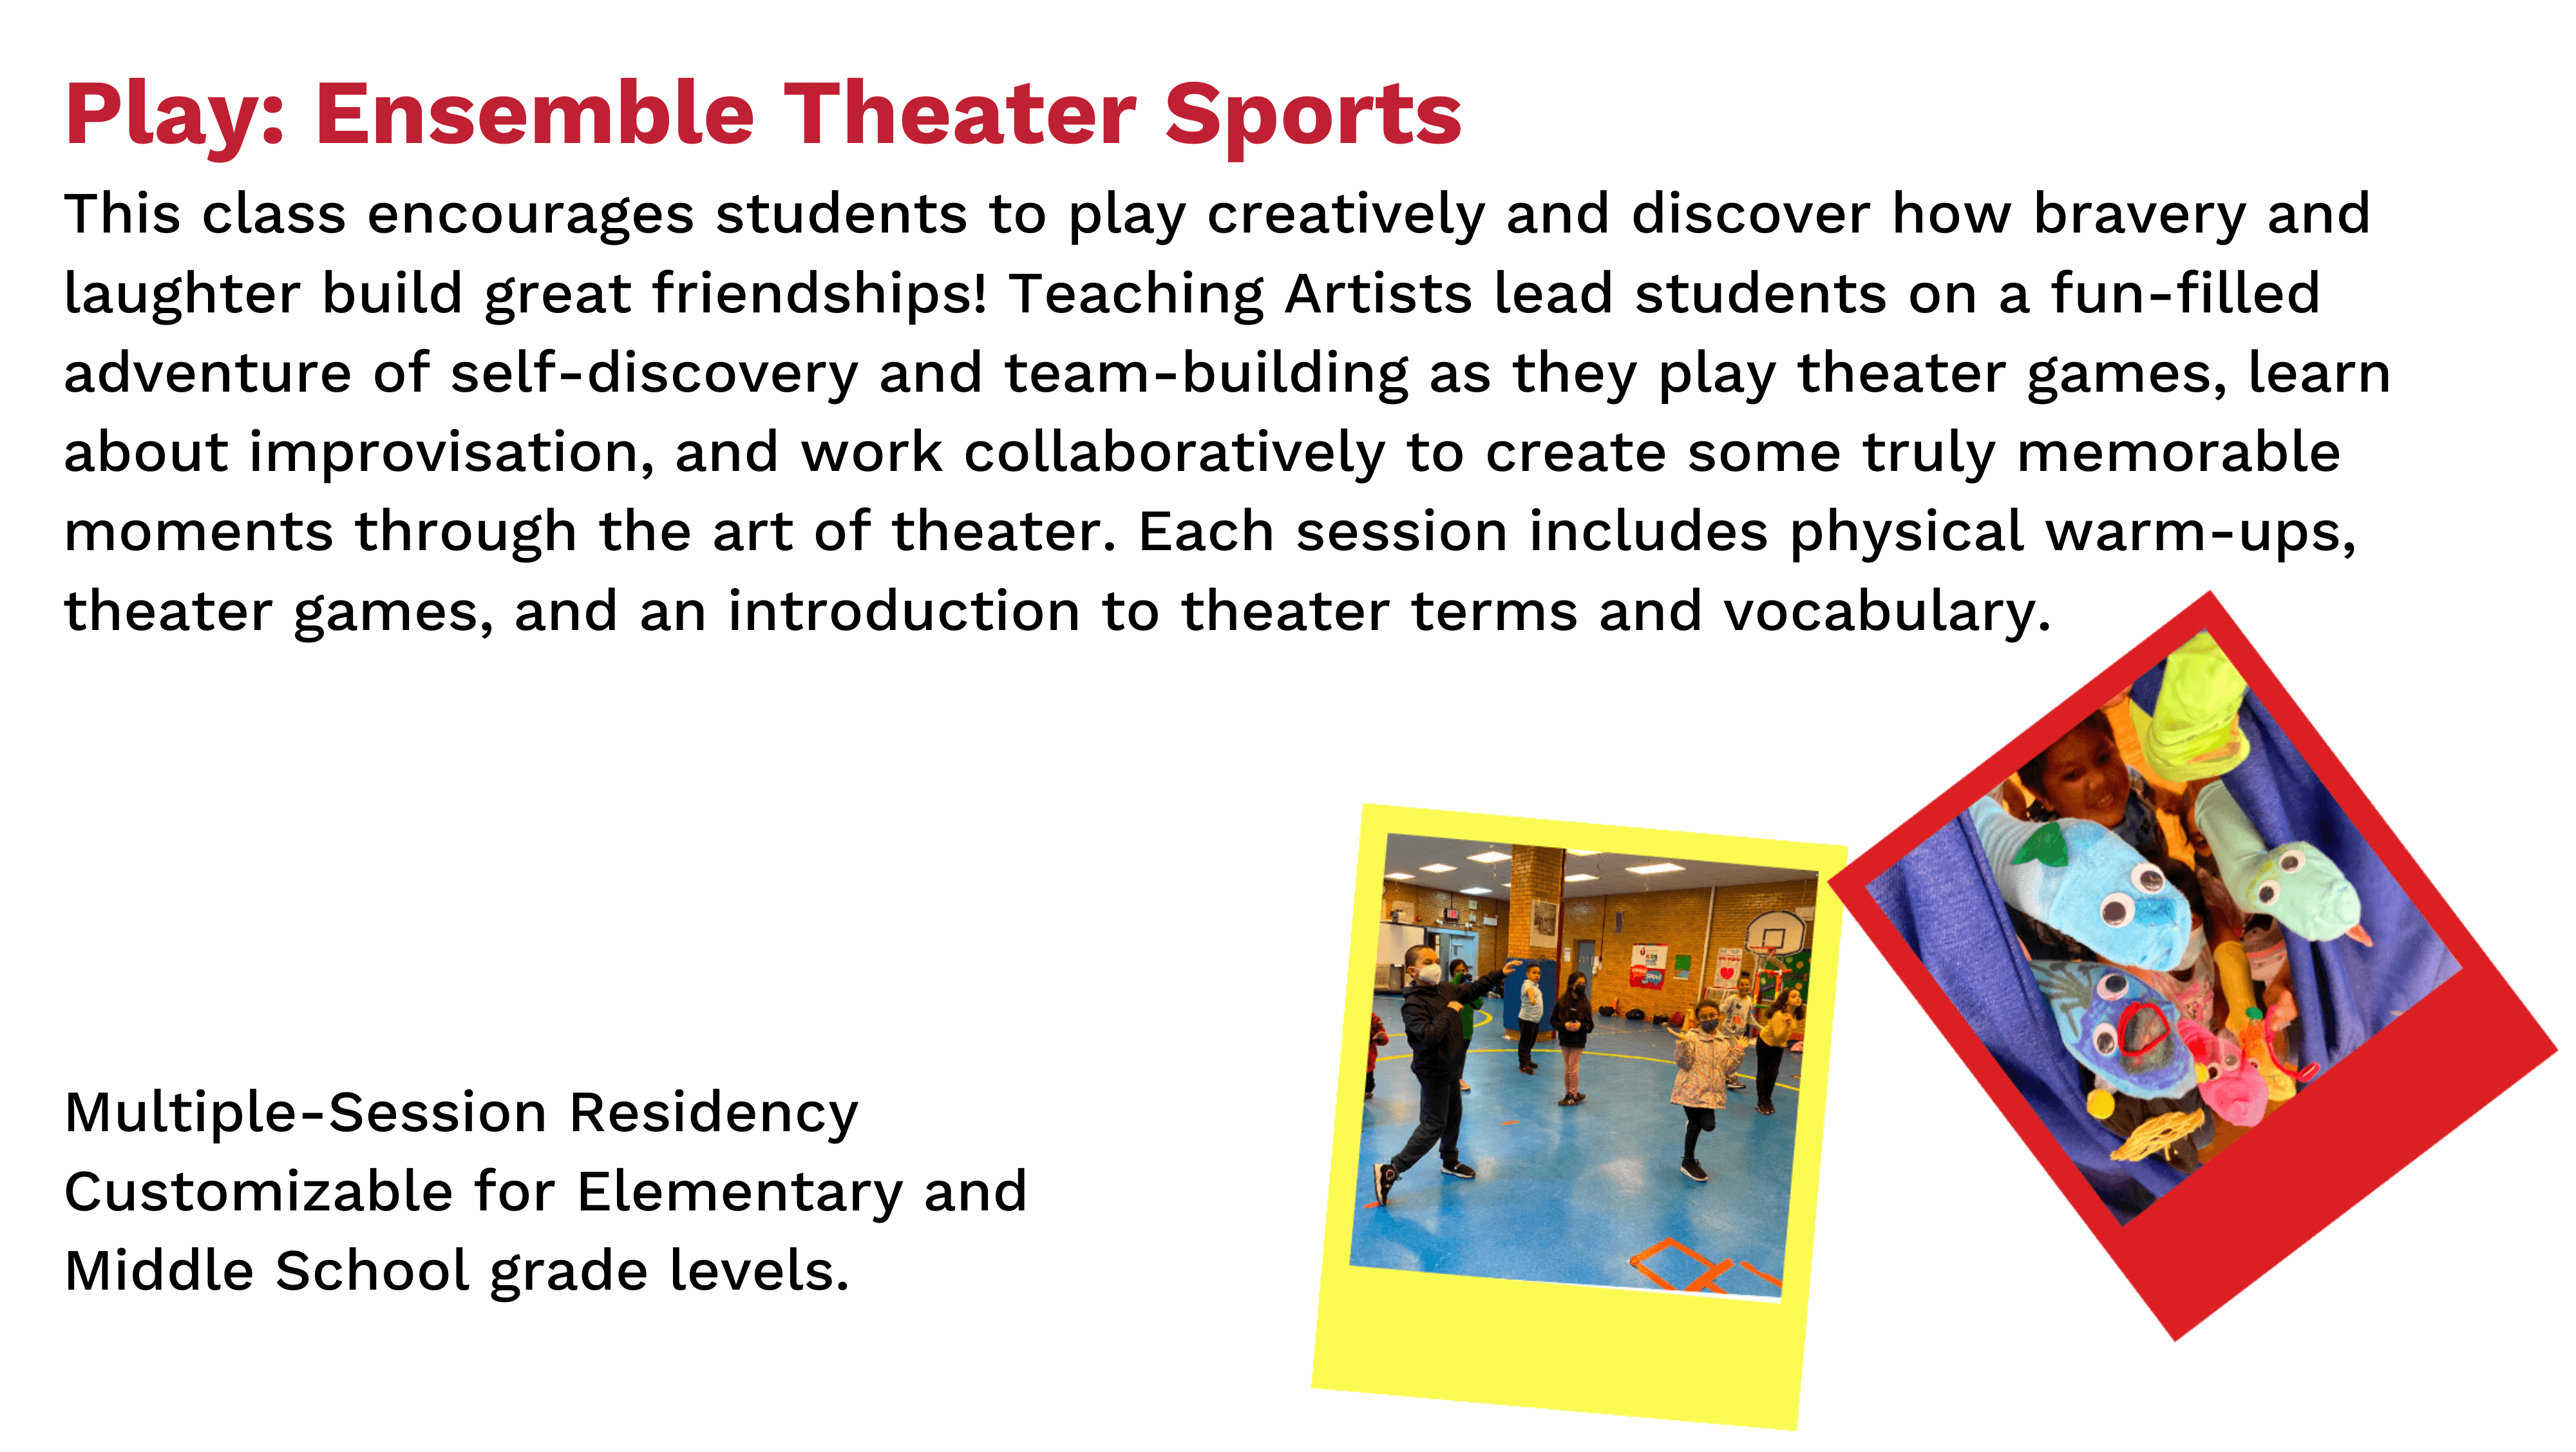 Play: Ensemble Theater Sports. This class encourages students to play creatively and discover how bravery and laughter build great friendships! Teaching Artists lead students on a fun-filled adventure of self-discovery and team-building as they play theater games, learn about improvisation, and work collaboratively to create some truly memorable moments through the art of theater. Each session includes physical warm-ups, theater games, and an introduction to theater terms and vocabulary.  Multiple-Session Residency. Customizable for Elementary and Middle School grade levels.